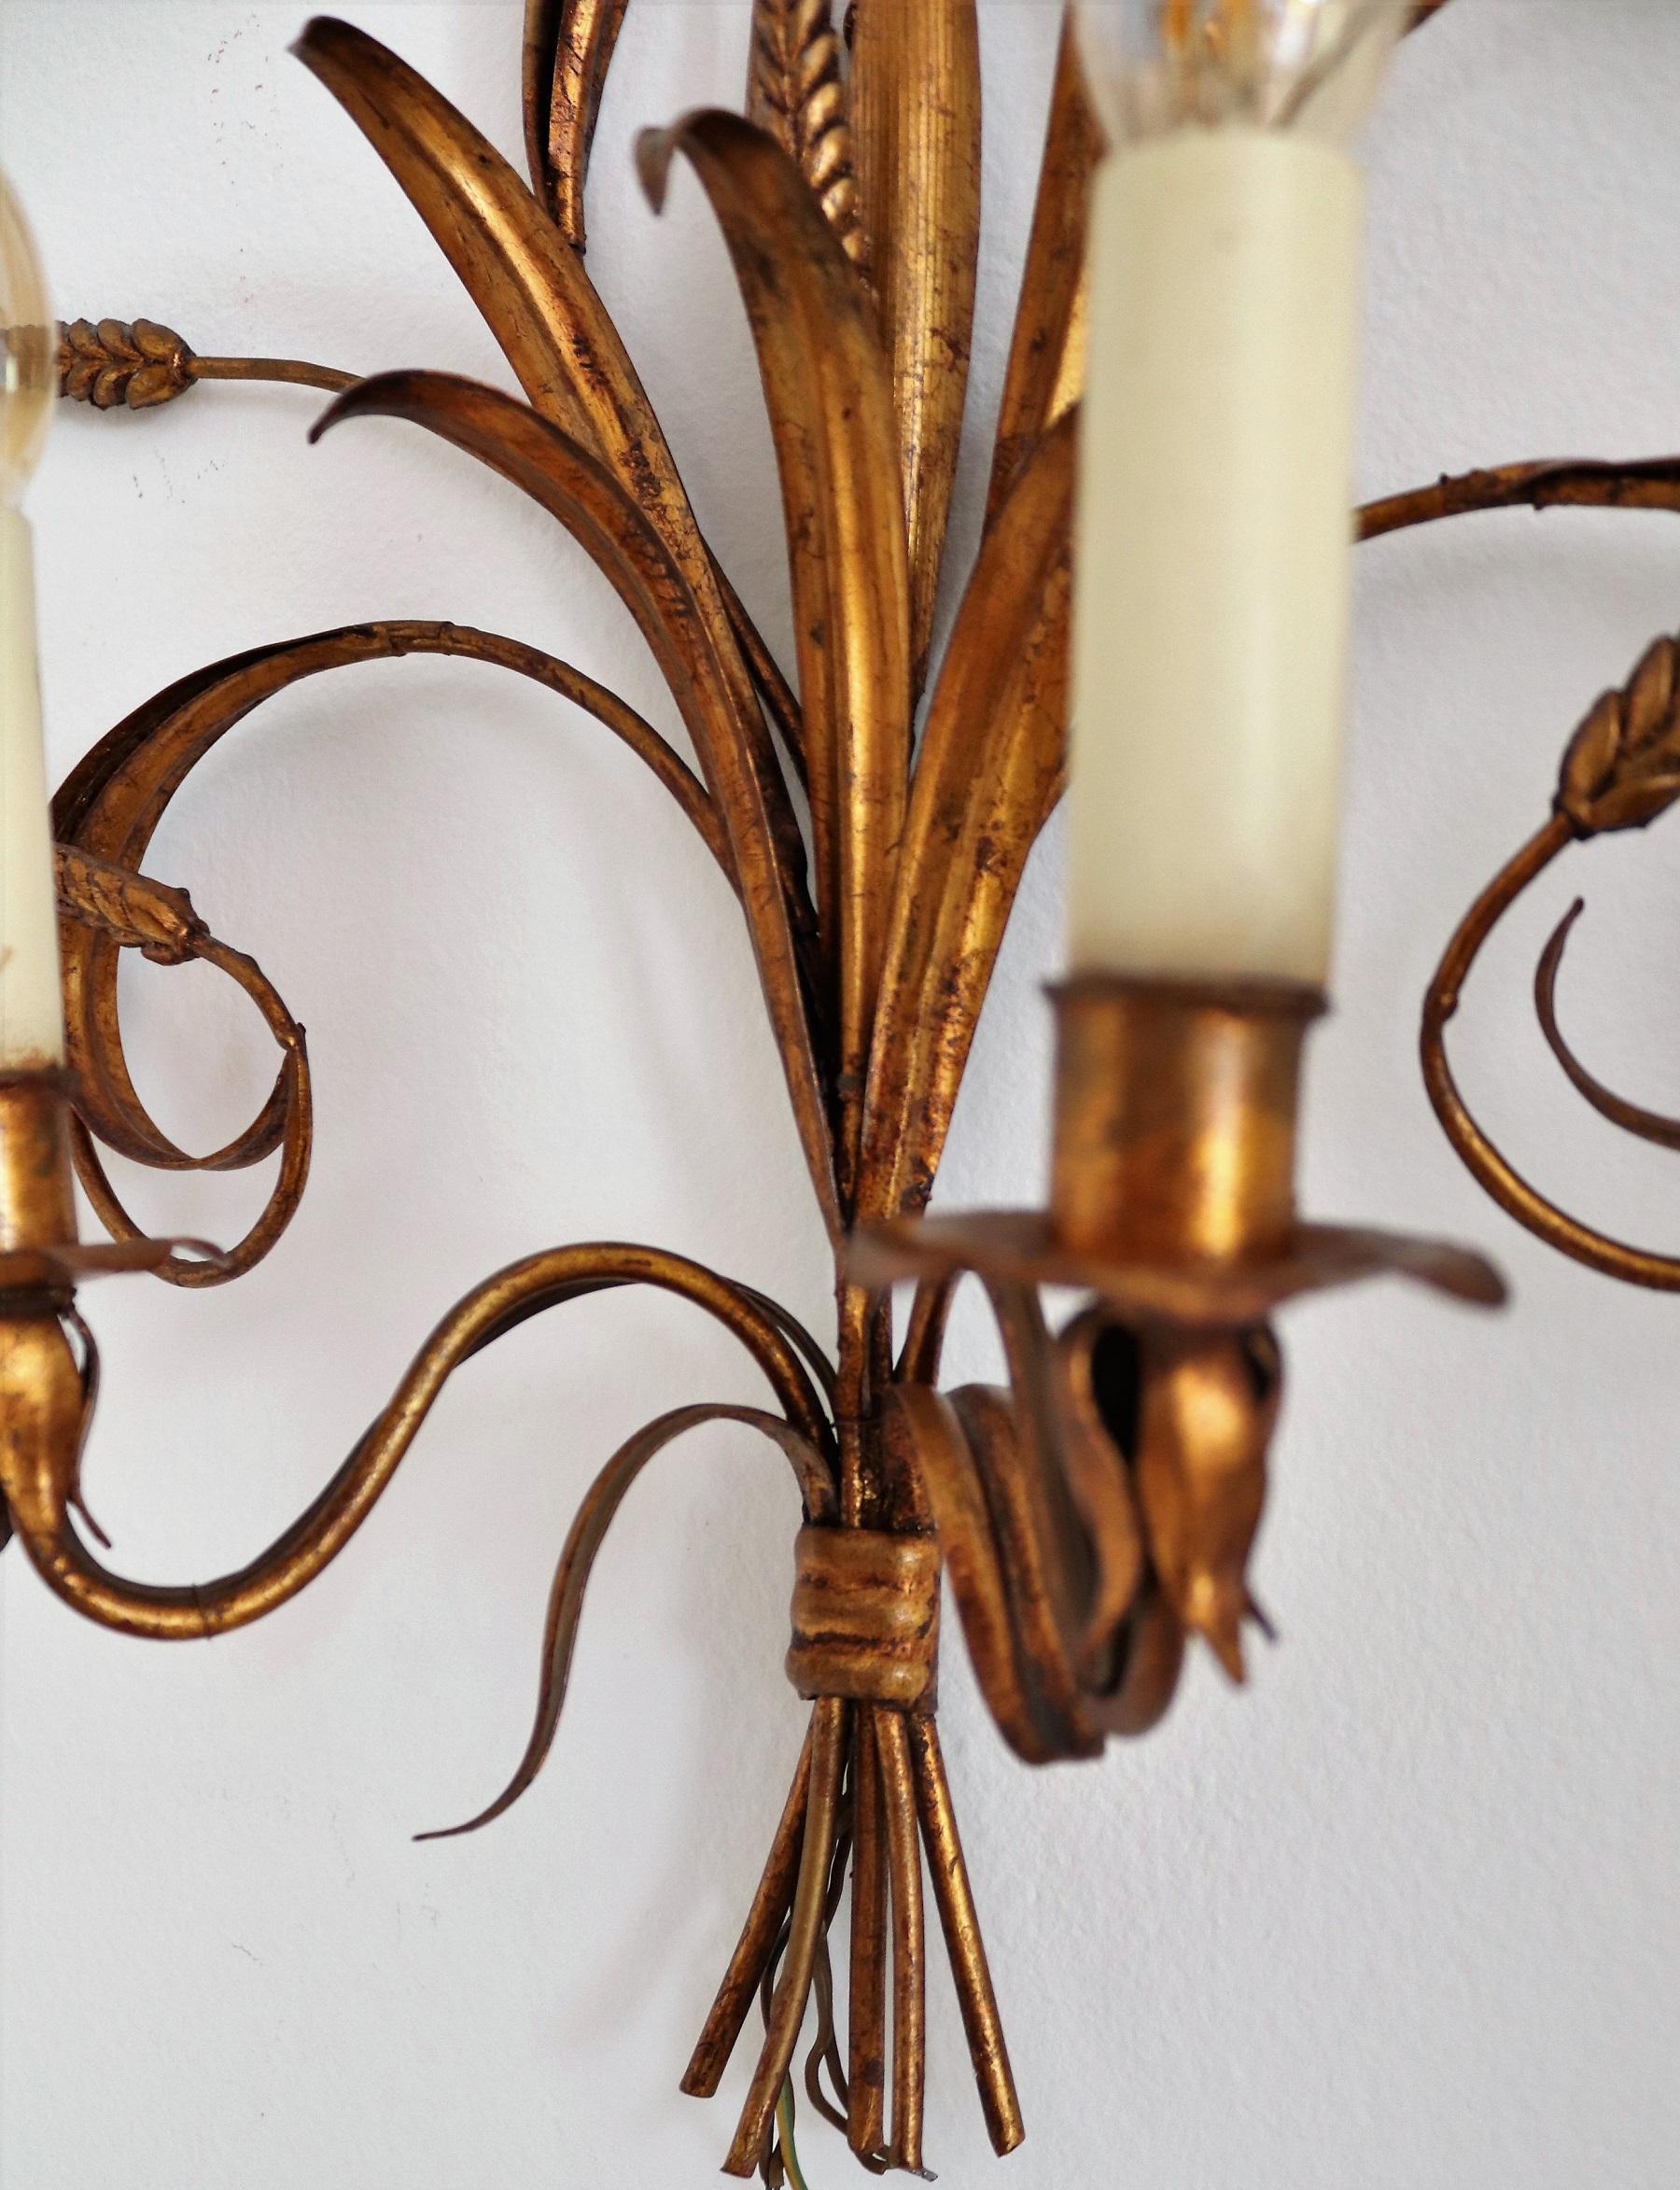 Italian Midcentury Gilt Tole Wall Sconces with Wheat Sheaf, 1950s, Set of Five For Sale 2